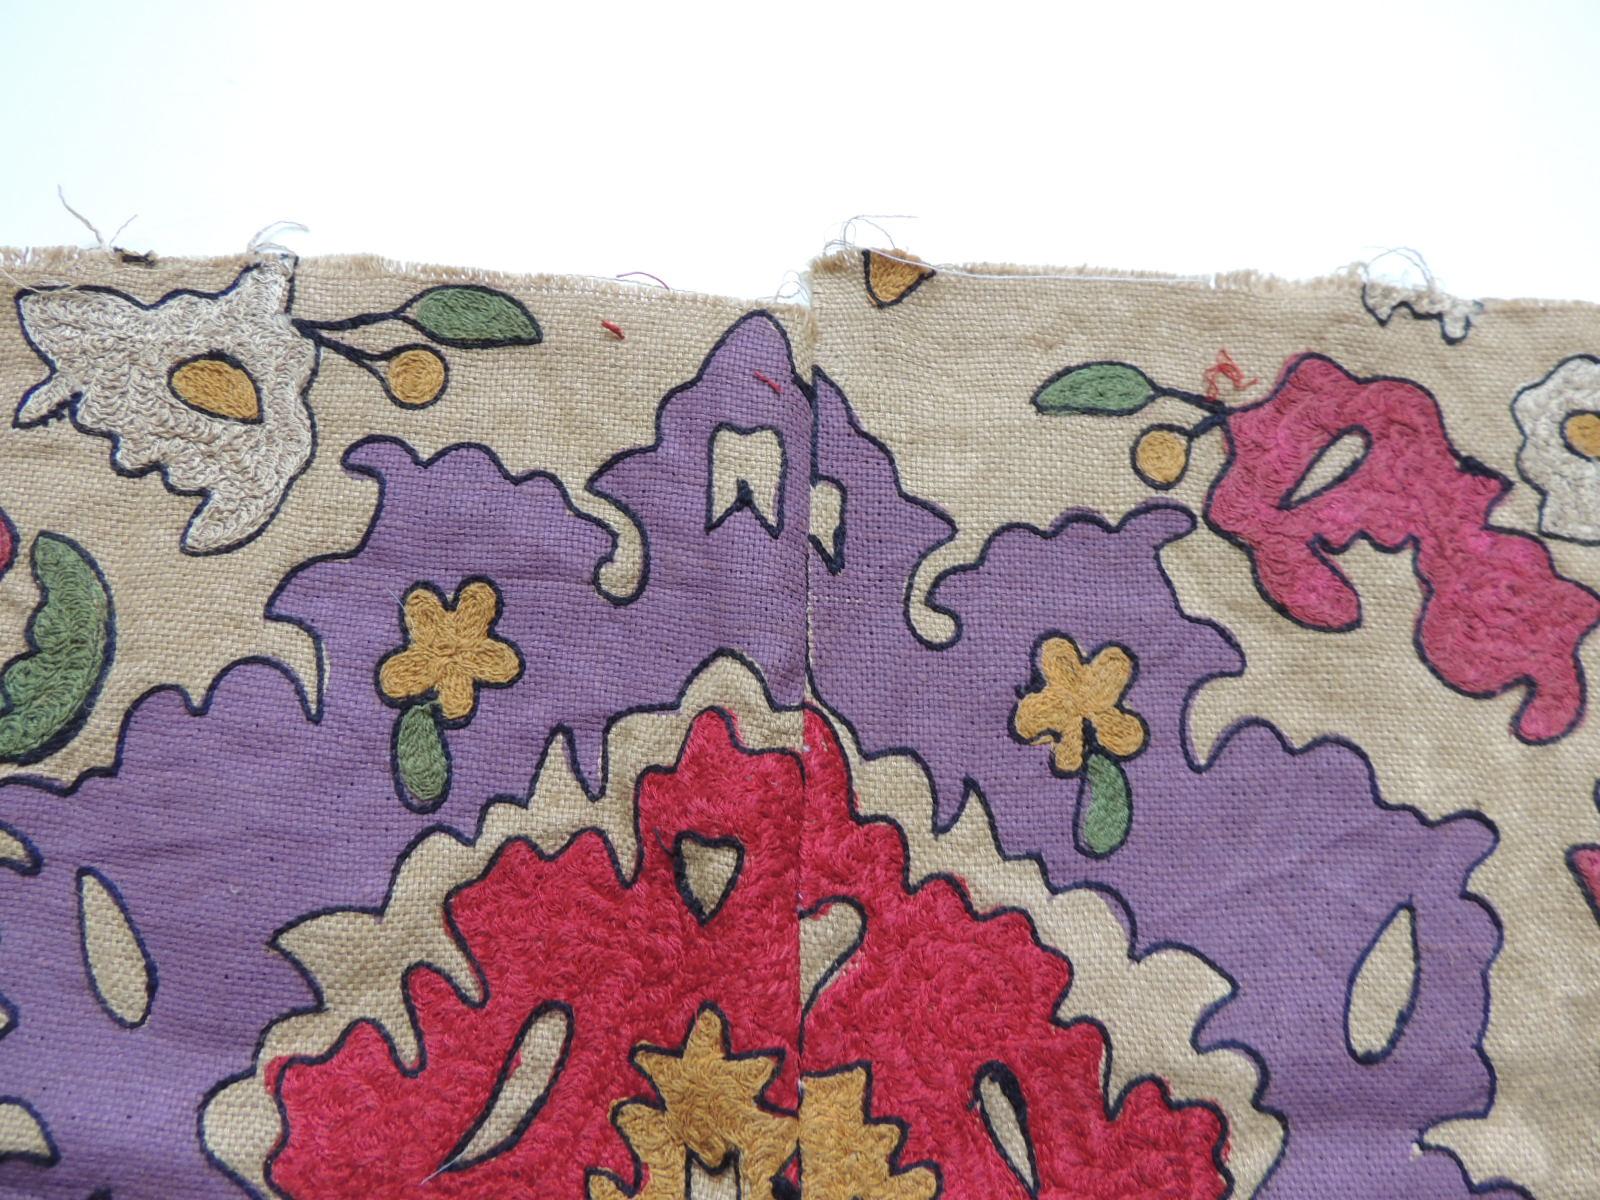 Uzbek Red and Purple Embroidery Suzani Textile Fragment